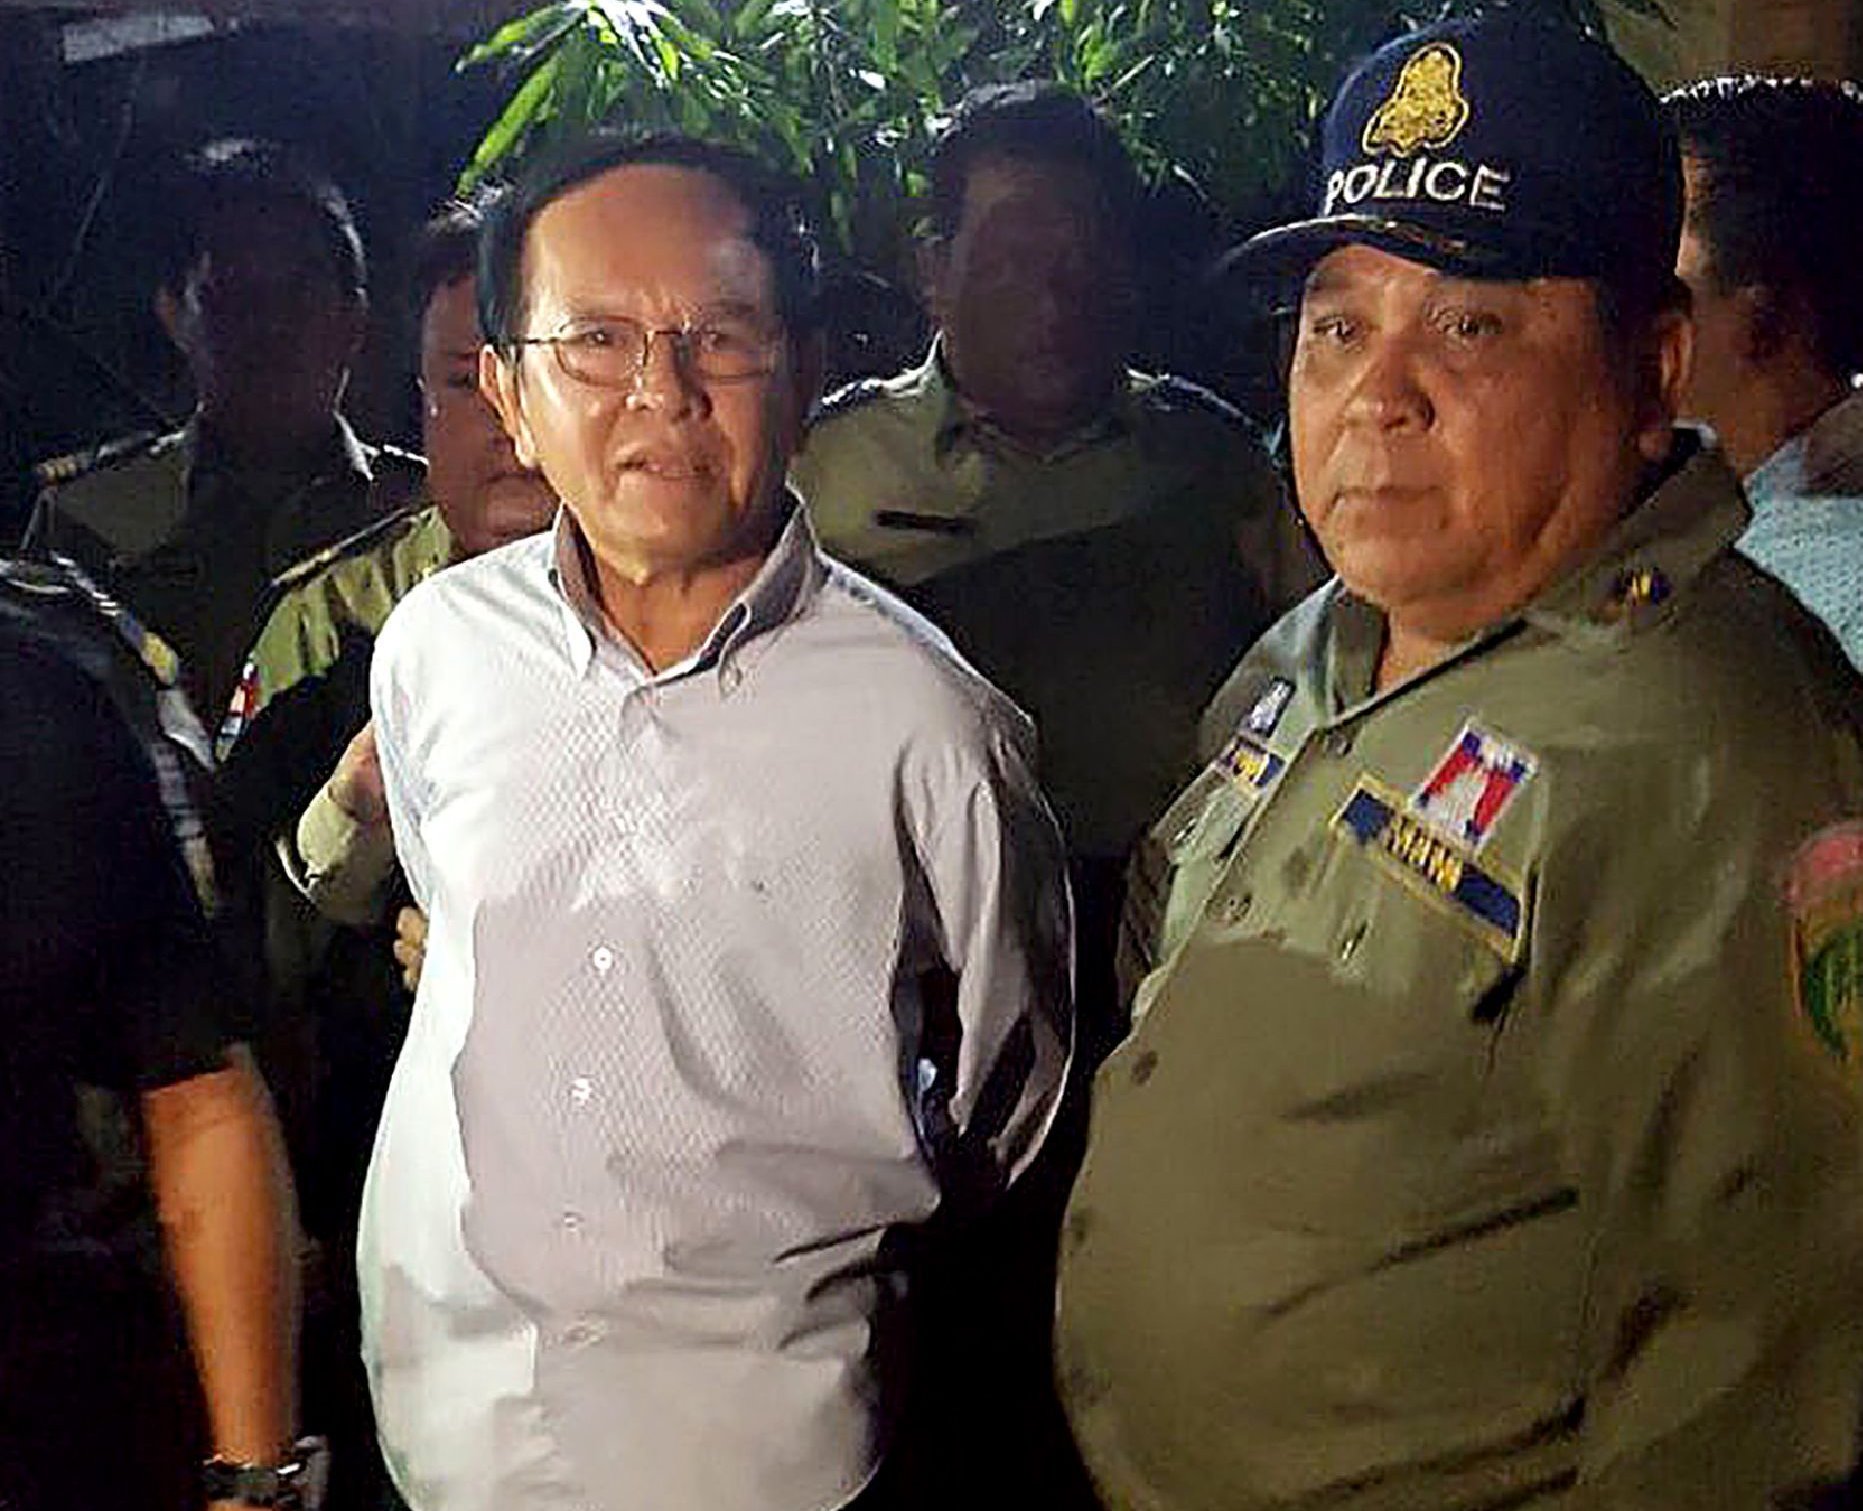  Kem Sokha was arrested at his home in Phnom Penh, the Cambodian capital, early Sunday. His daughter said his whereabouts were unknown. CreditCreditAgence France-Presse — Getty Images 